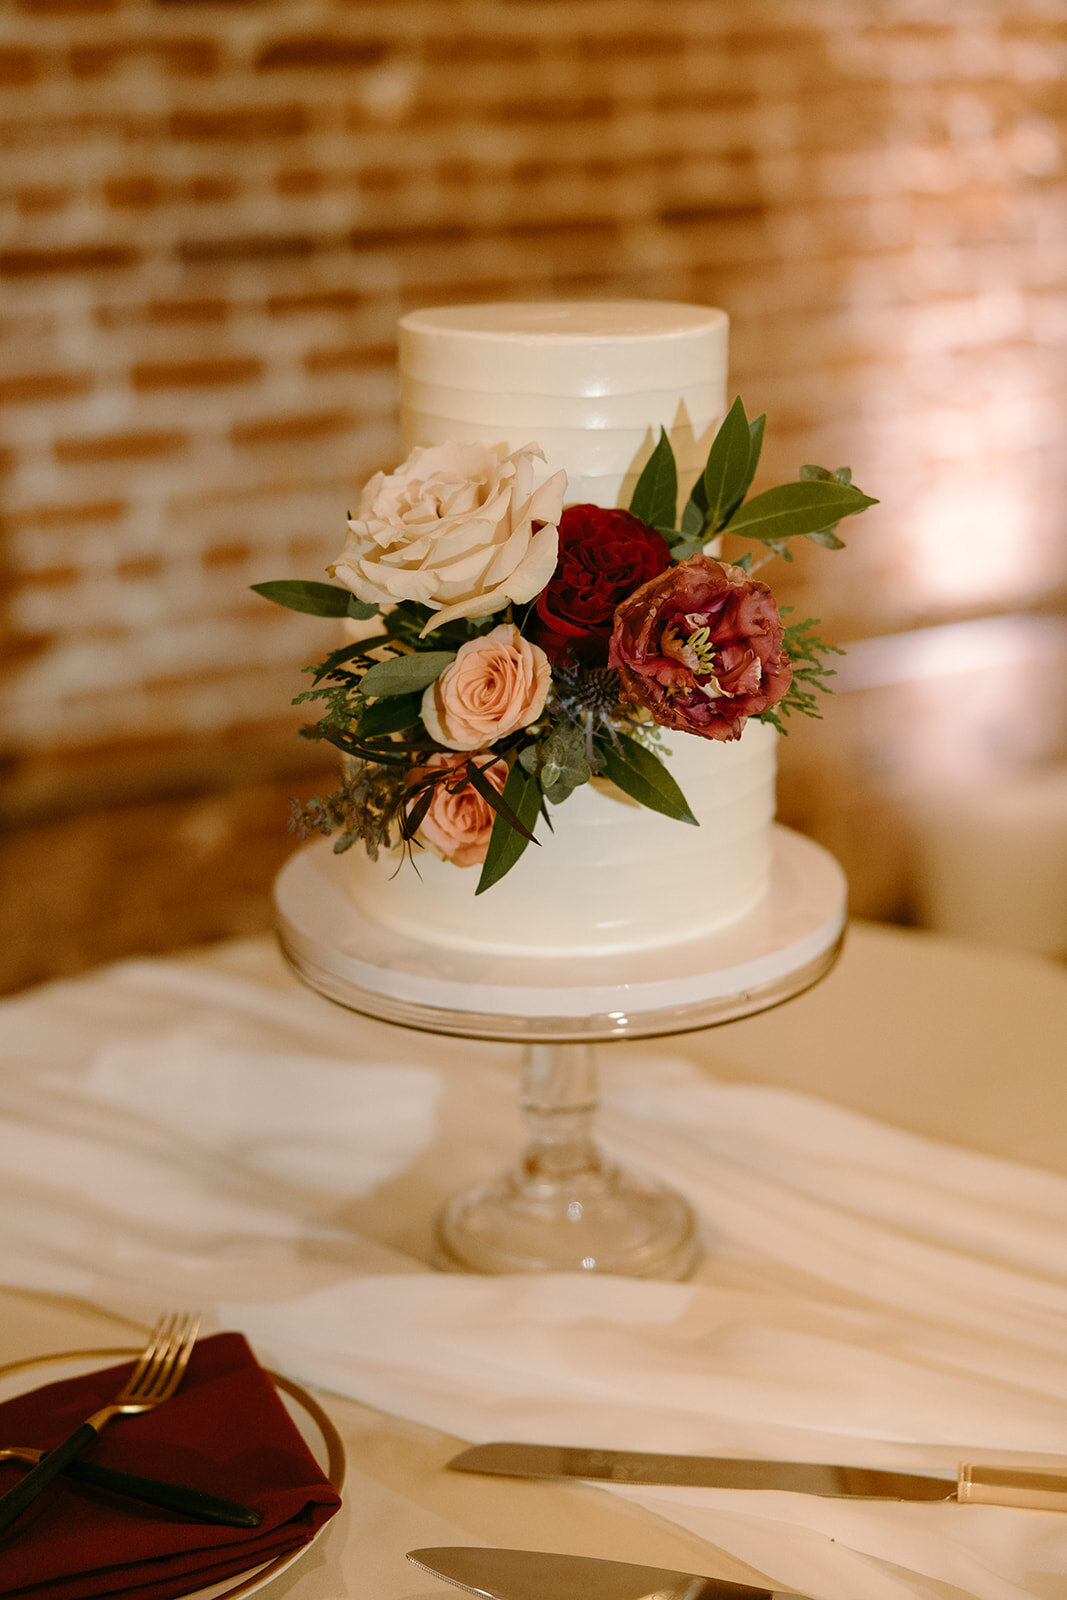 Red and White Wedding Cake